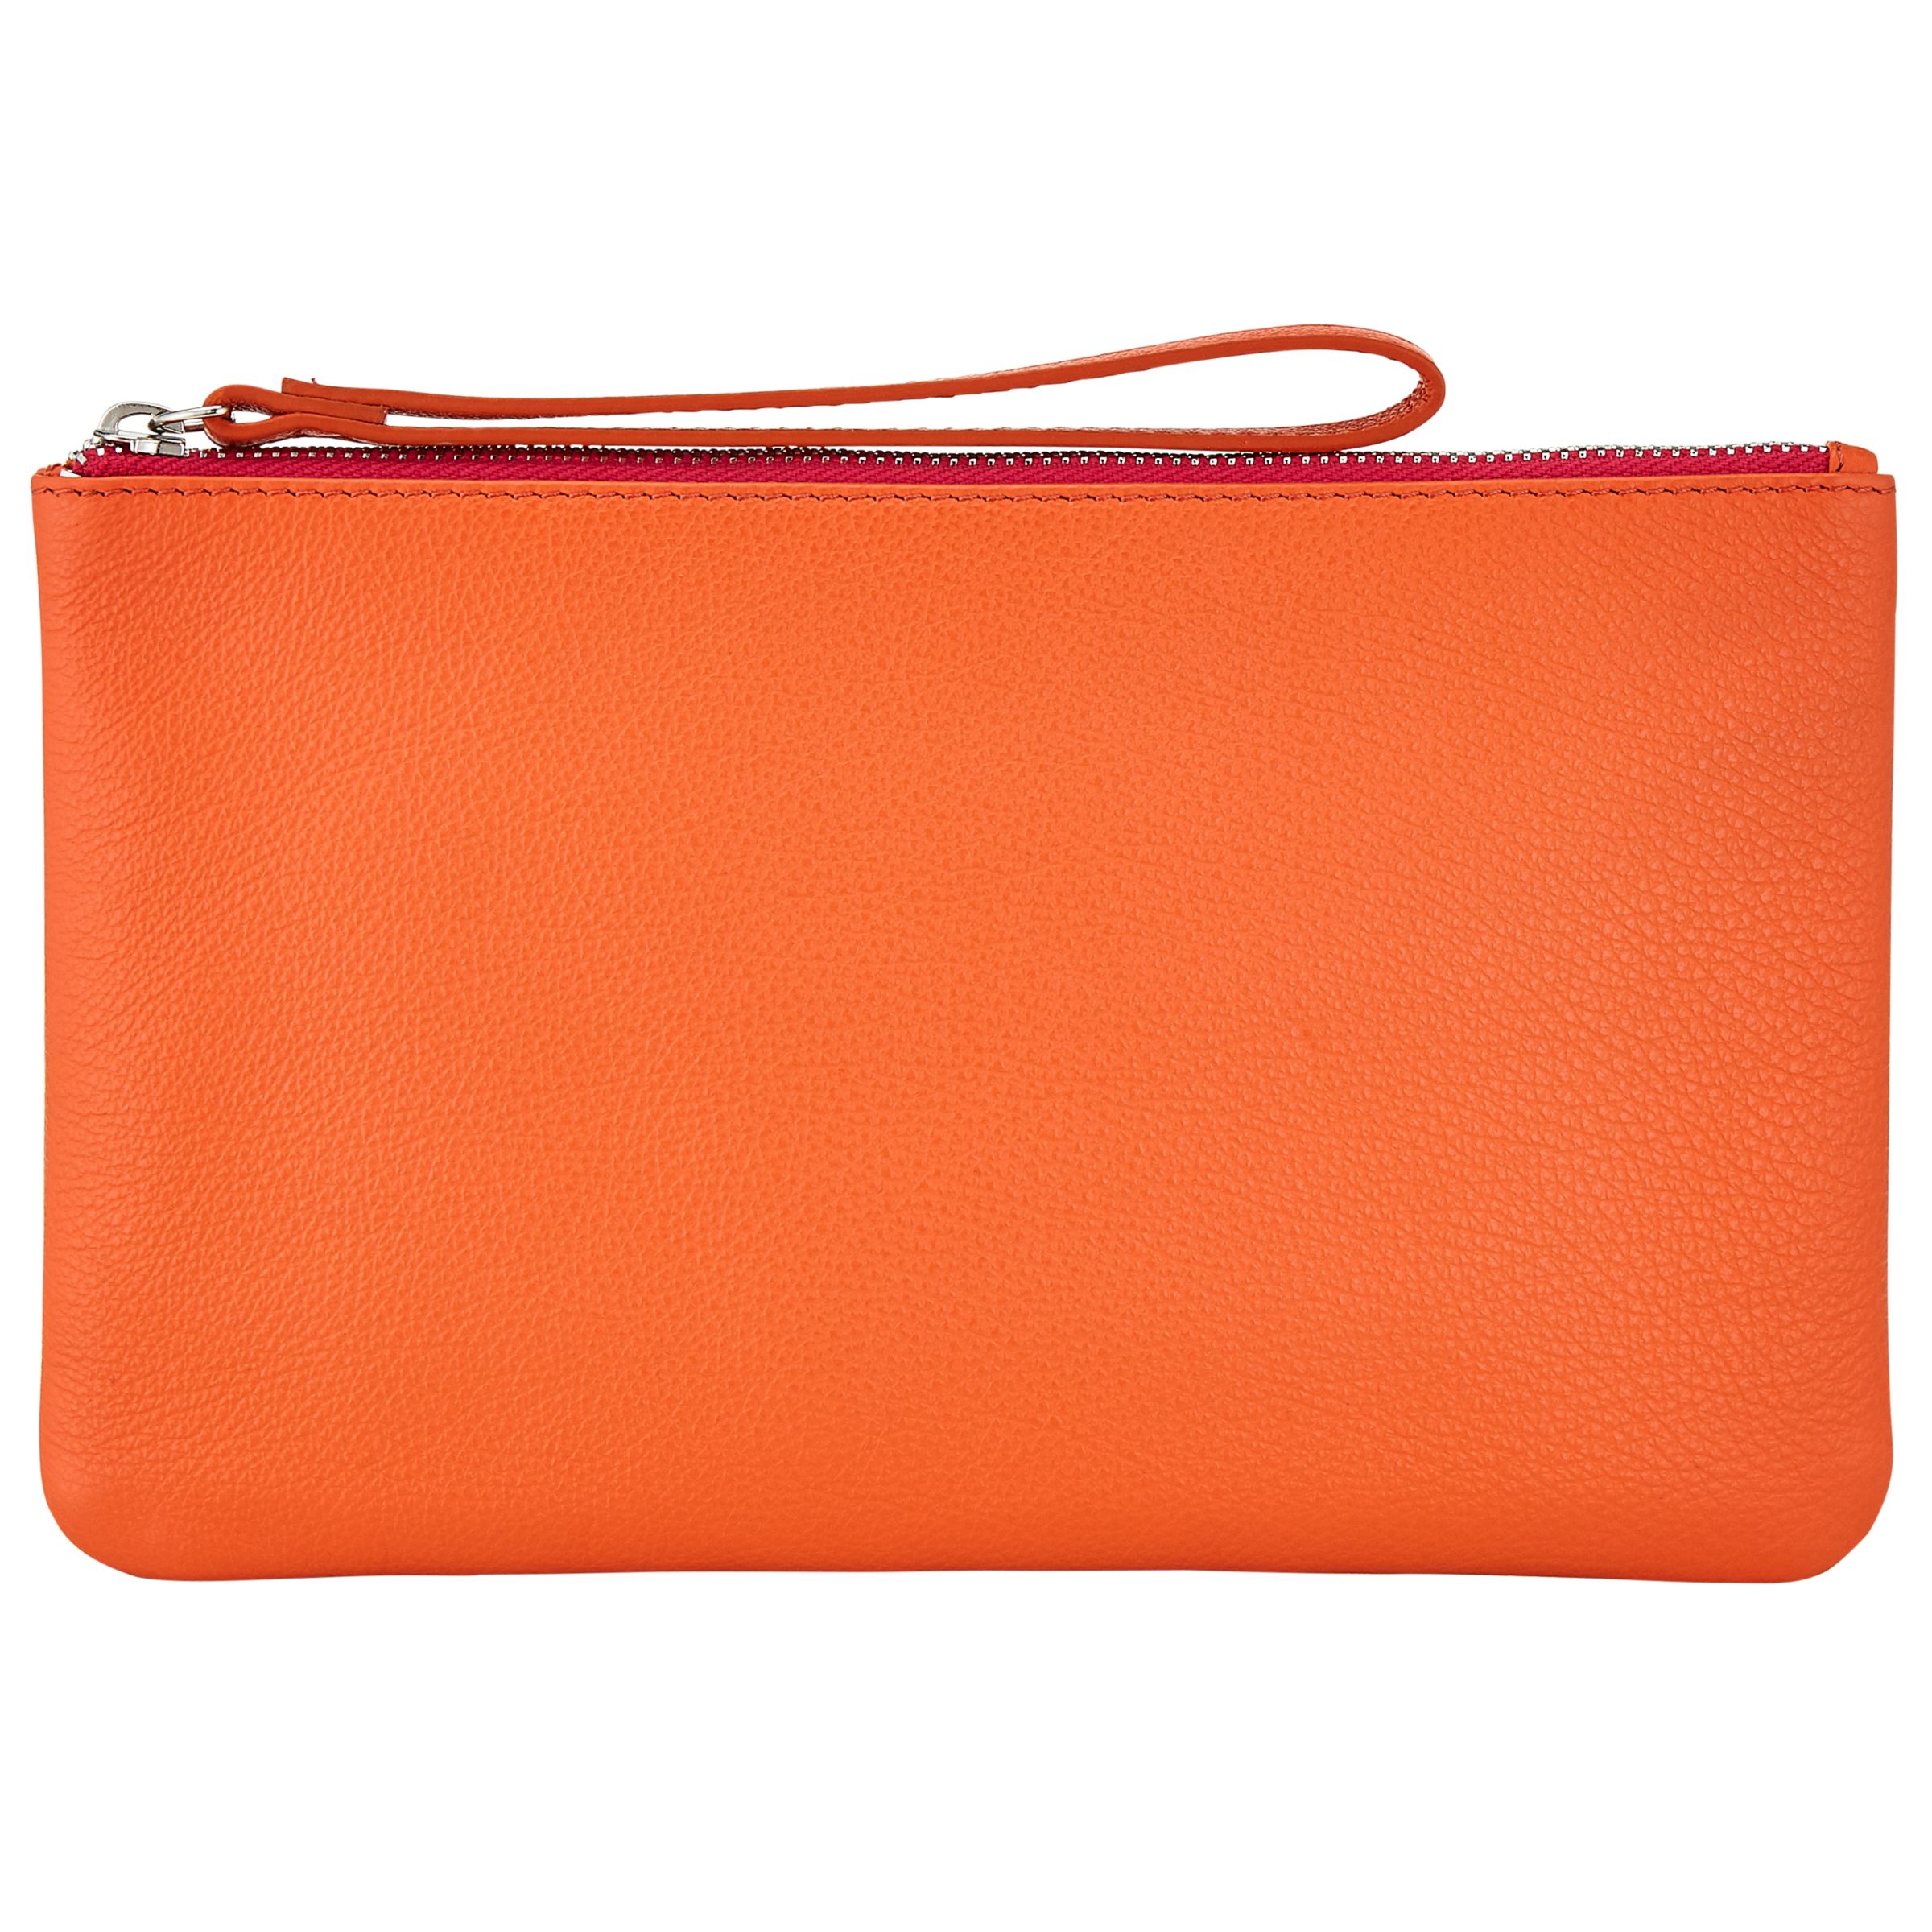 John Lewis Contrast Leather Zip Pouch